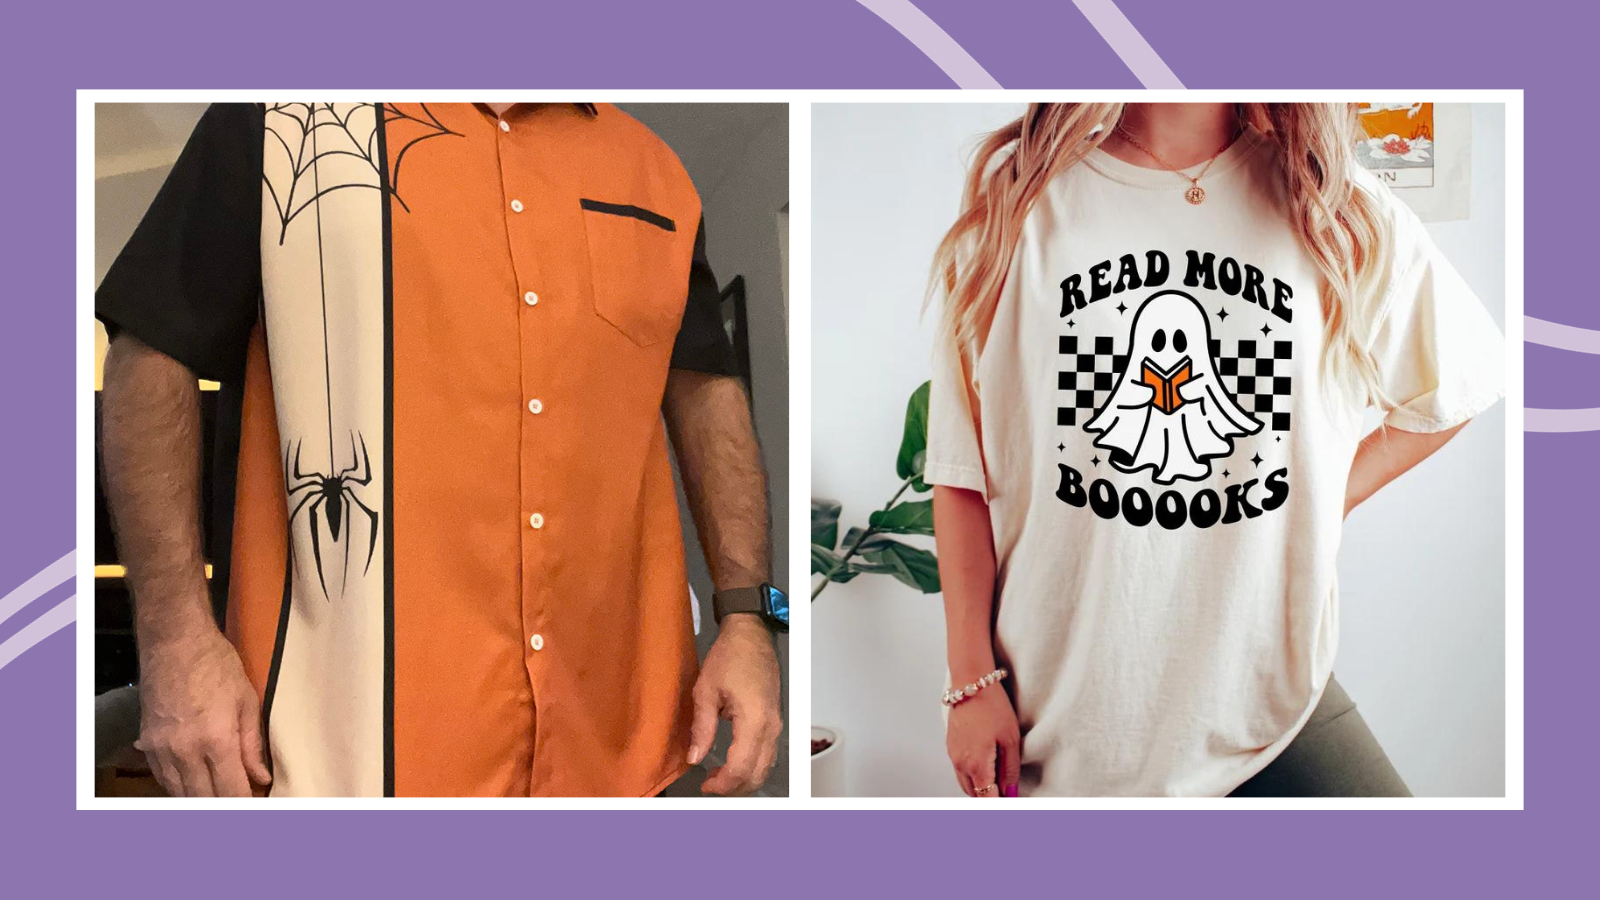 Examples of some of the best Halloween shirts including a man in a an orange and black button down shirt with spiders and a woman in a t-shirt with a ghost that says I love booooks.